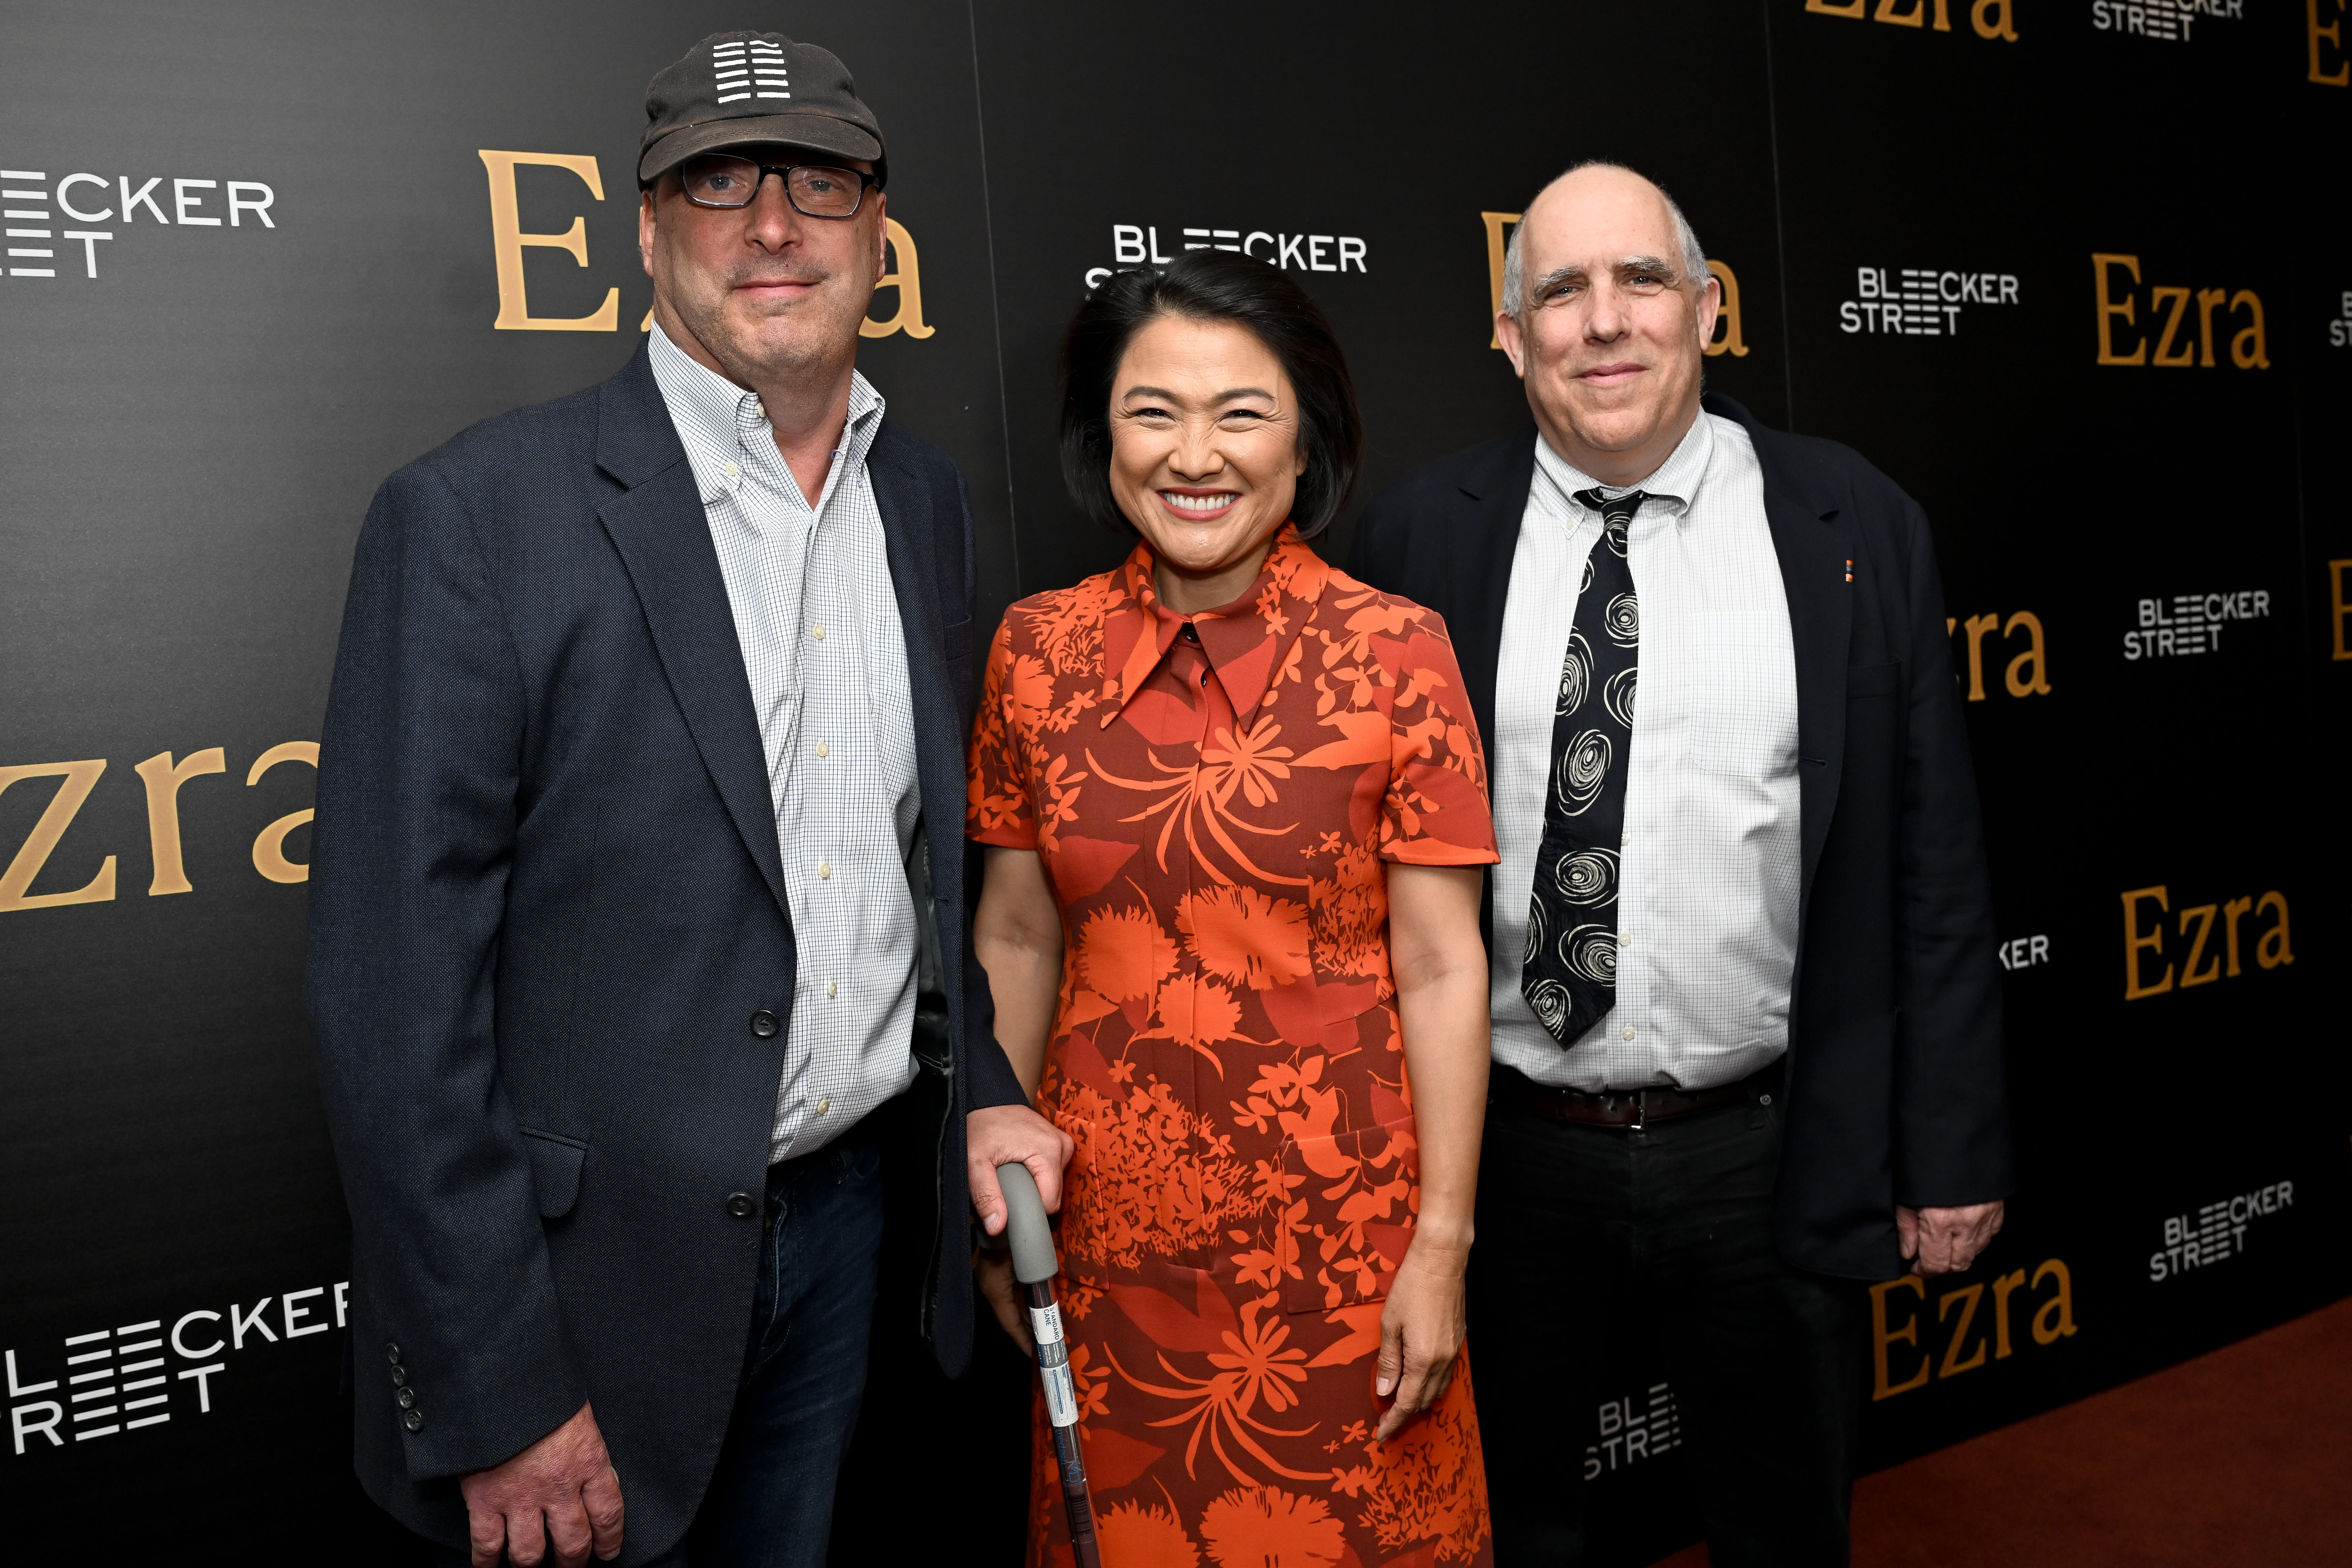 Closer Media Founders Zhang Xin, William Horberg on ‘Ezra’ and Producing Movies That Make You Feel and Think